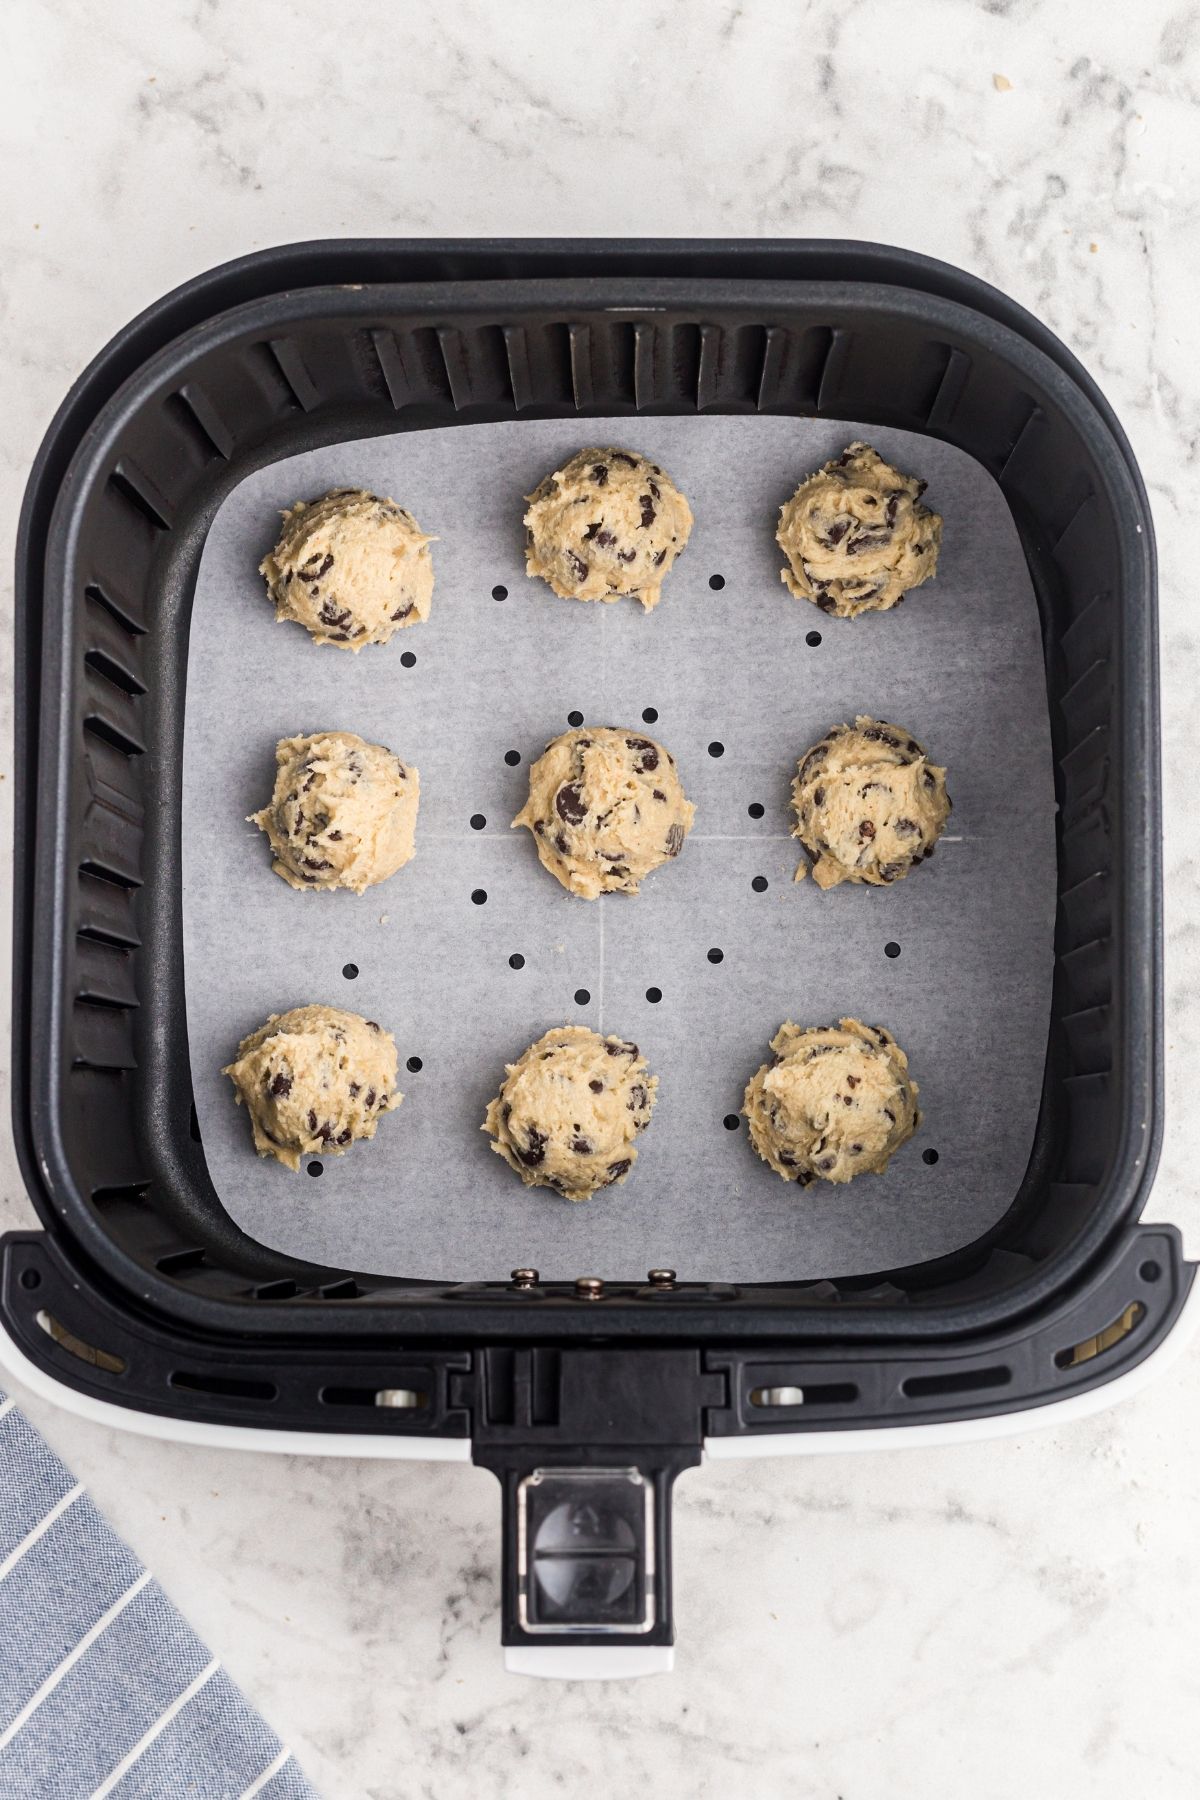 Balls of cookie dough in the air fryer basket lined with parchment paper